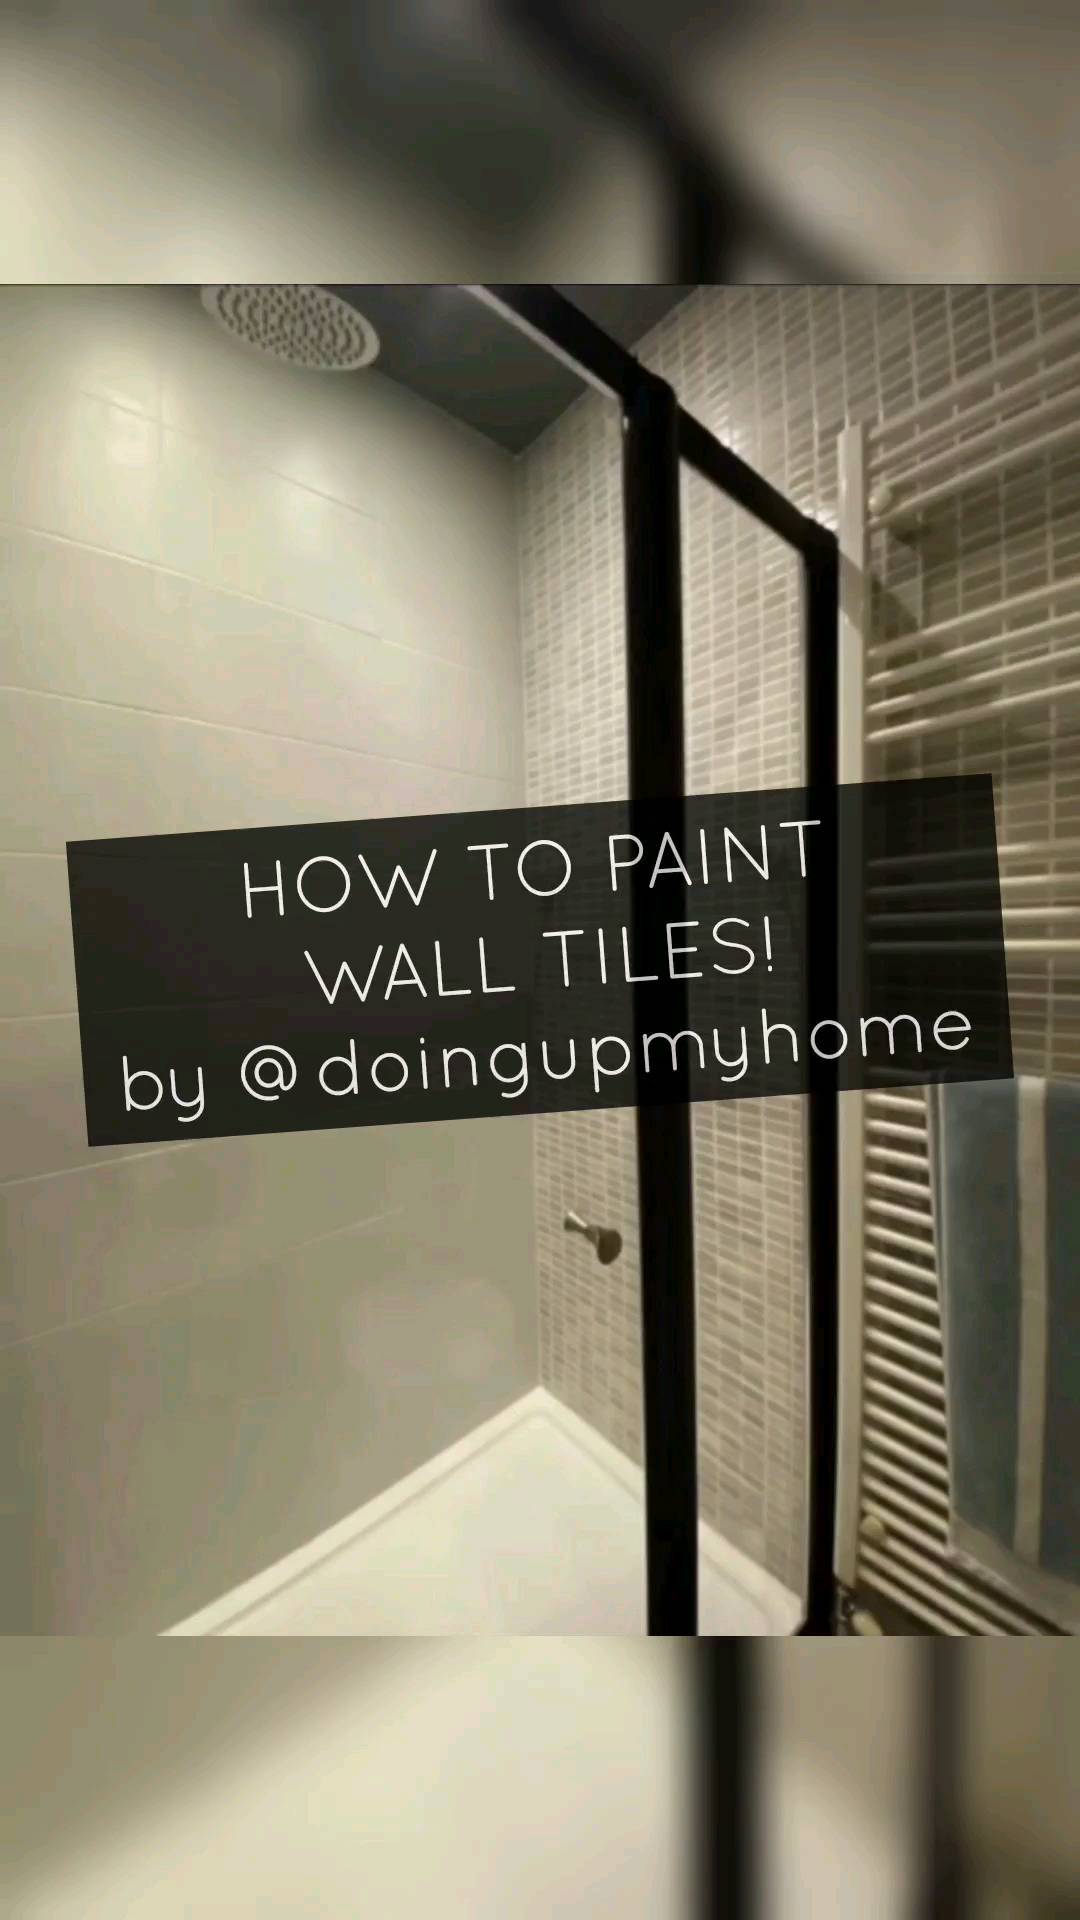 @doingupmyhome strikes again!

The brilliant Ash @doingupmyhome demonstrates perfectly how you can tranform wall tiles in your home with our Tikkurila Wall Tile Paint kit featuring Otex Akva Primer and Luja 20 topcoat.

Follow @doingupmyhome for more incredible painting and DIY tips. 

📌 Save this post for later. 📌

Try it for yourself and let us know what you think!